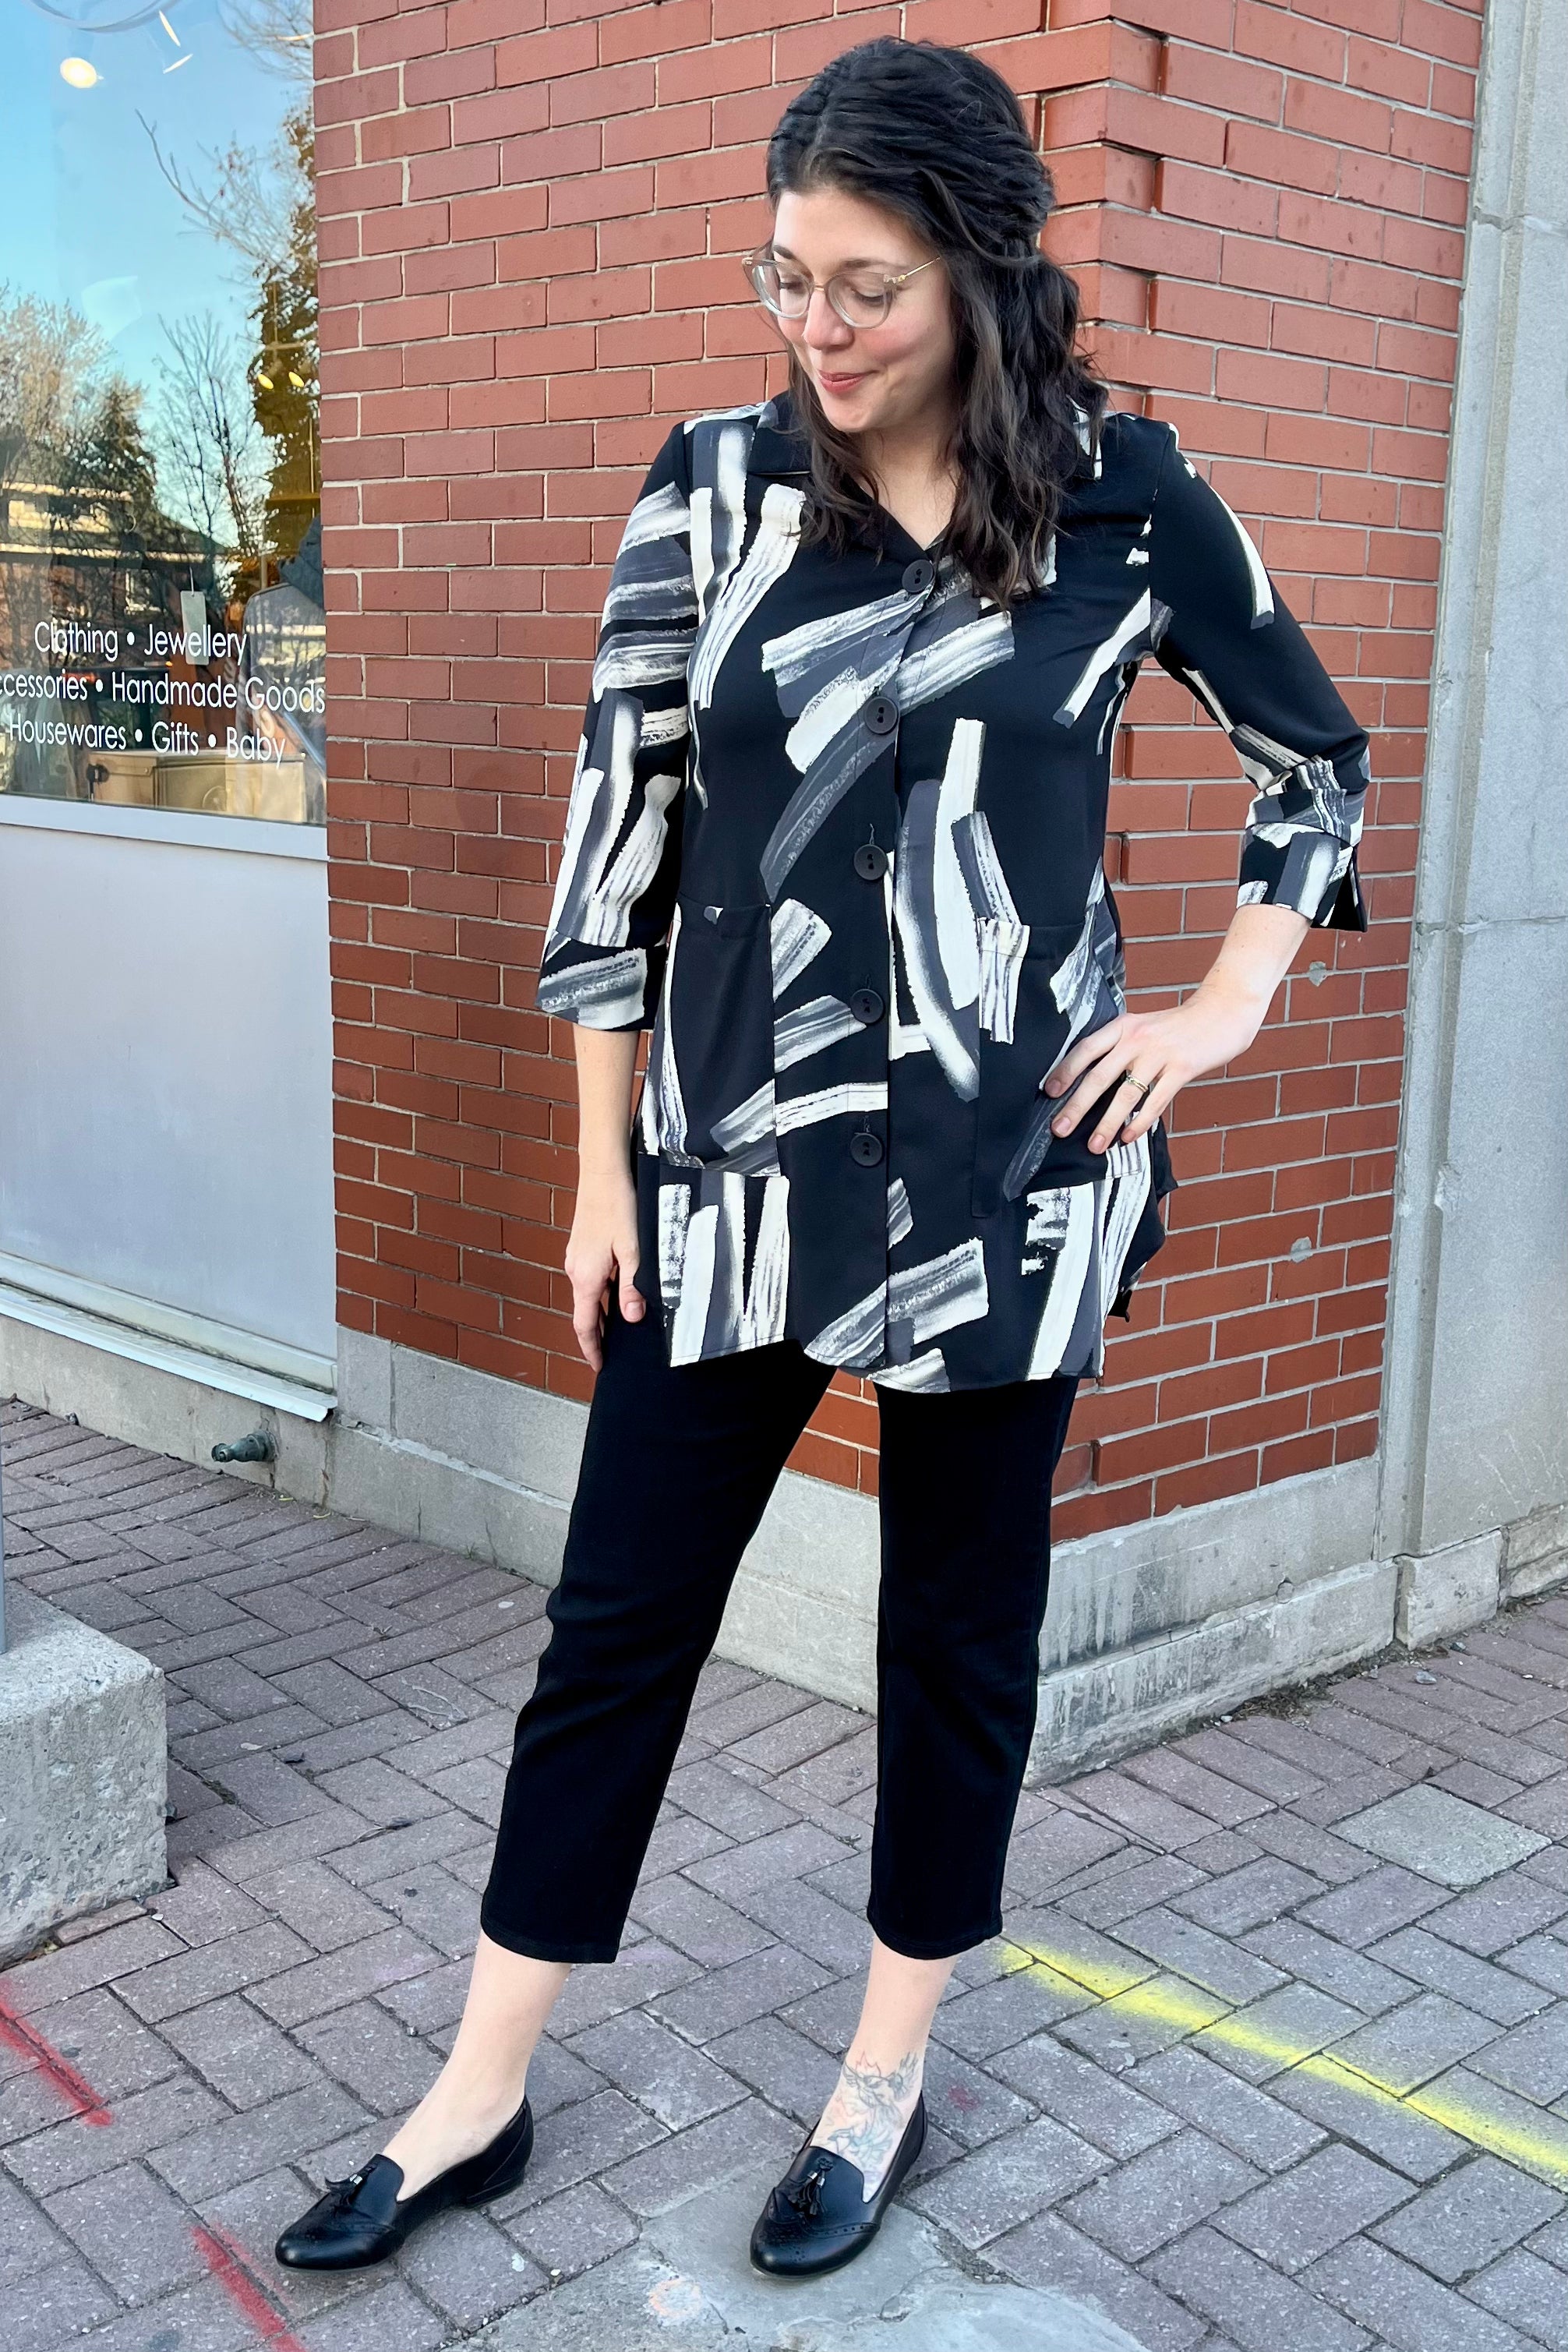 Norite Blouse by Compi K, B&W Brushstrokes, V-neck, tunic length, button front, 3/4 sleeves, front patch pockets, sizes XS to XL, made in Canada